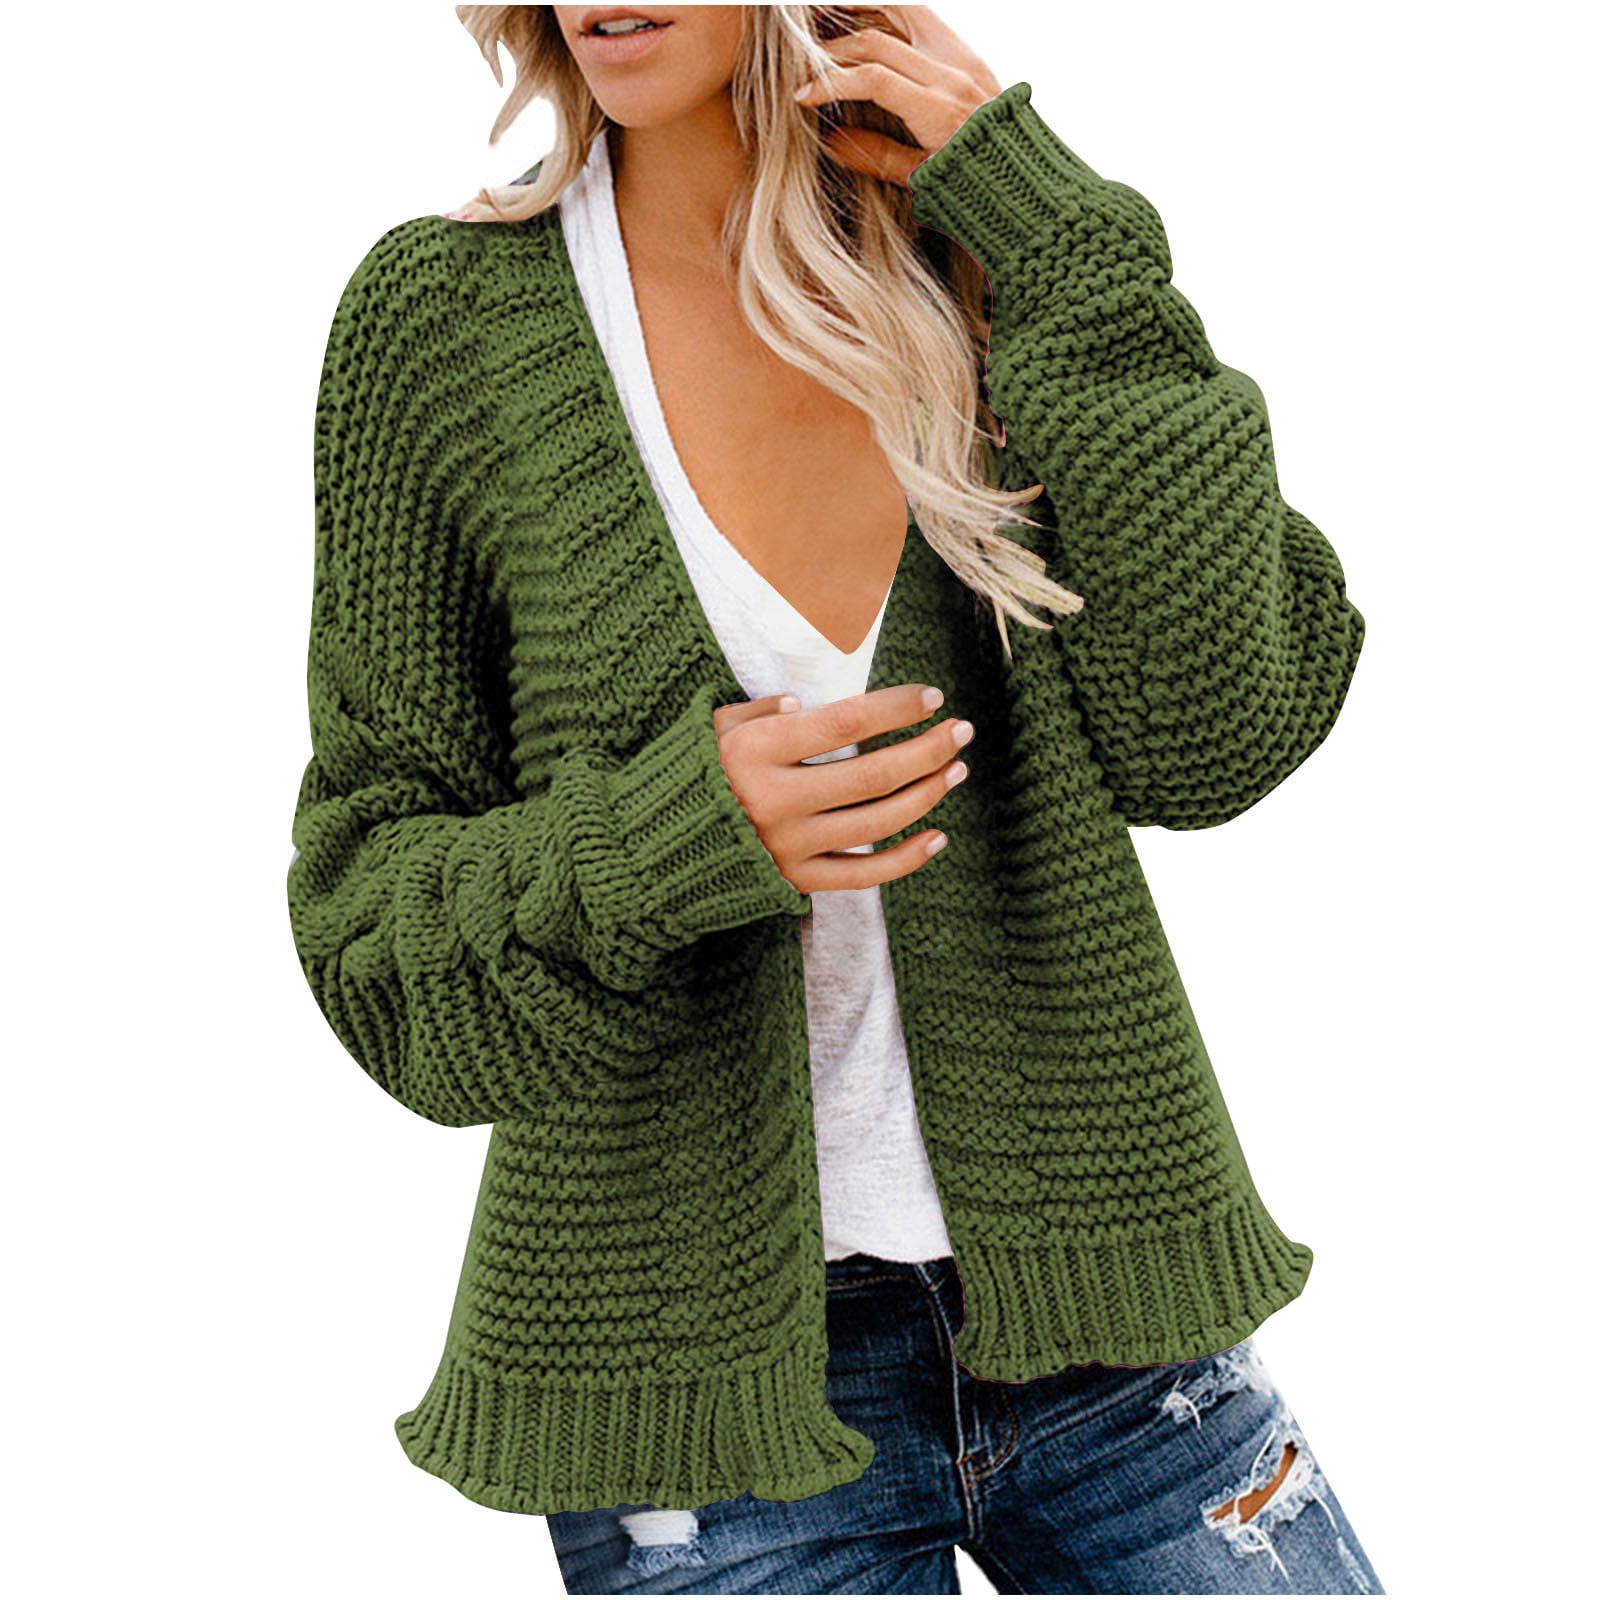 XFLWAM Womens Chunky Cardigan Cable Knit Sweater Oversized Open Front Cardigan Sweaters Army Green M Walmart.com